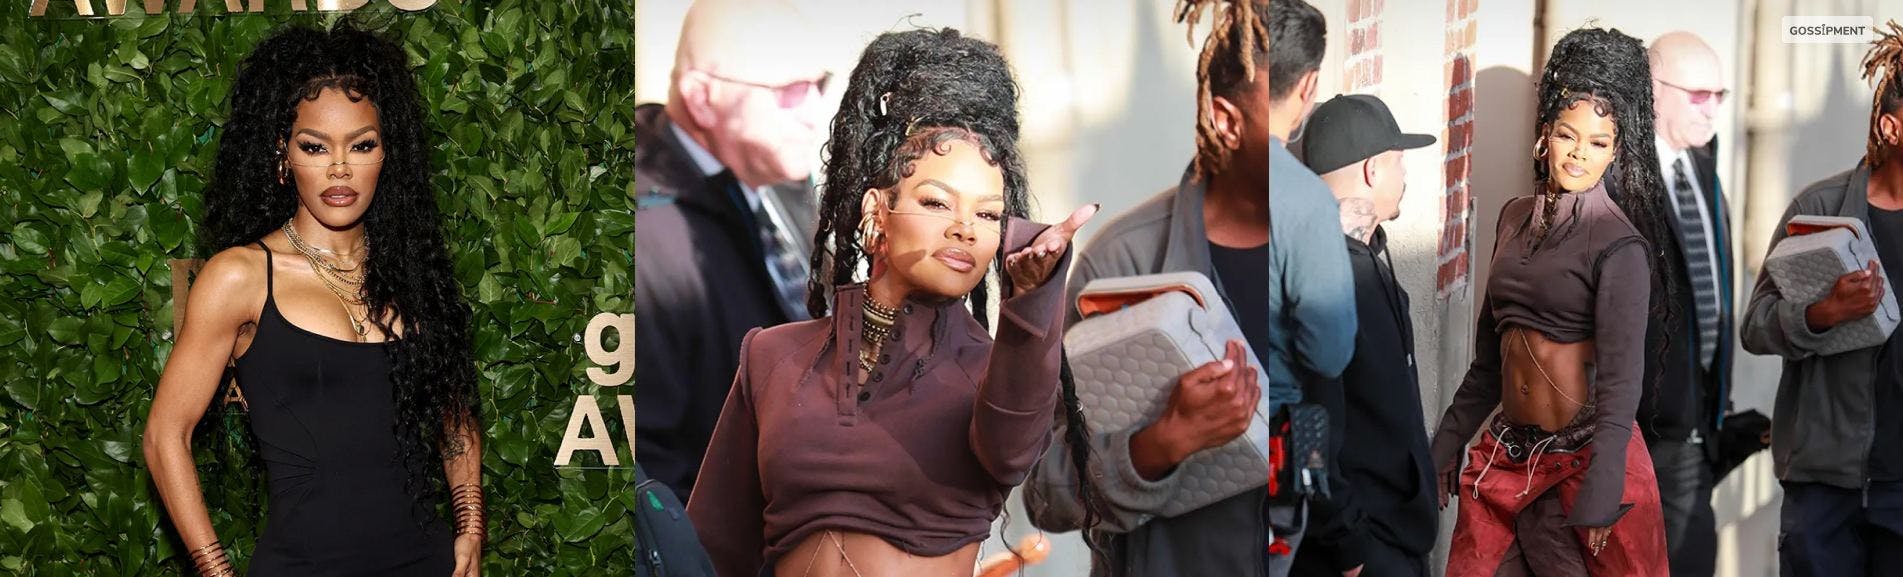 Cover Image for Teyana Taylor Looks Completely Unbothered Amid Divorce Drama With Iman Shumpert